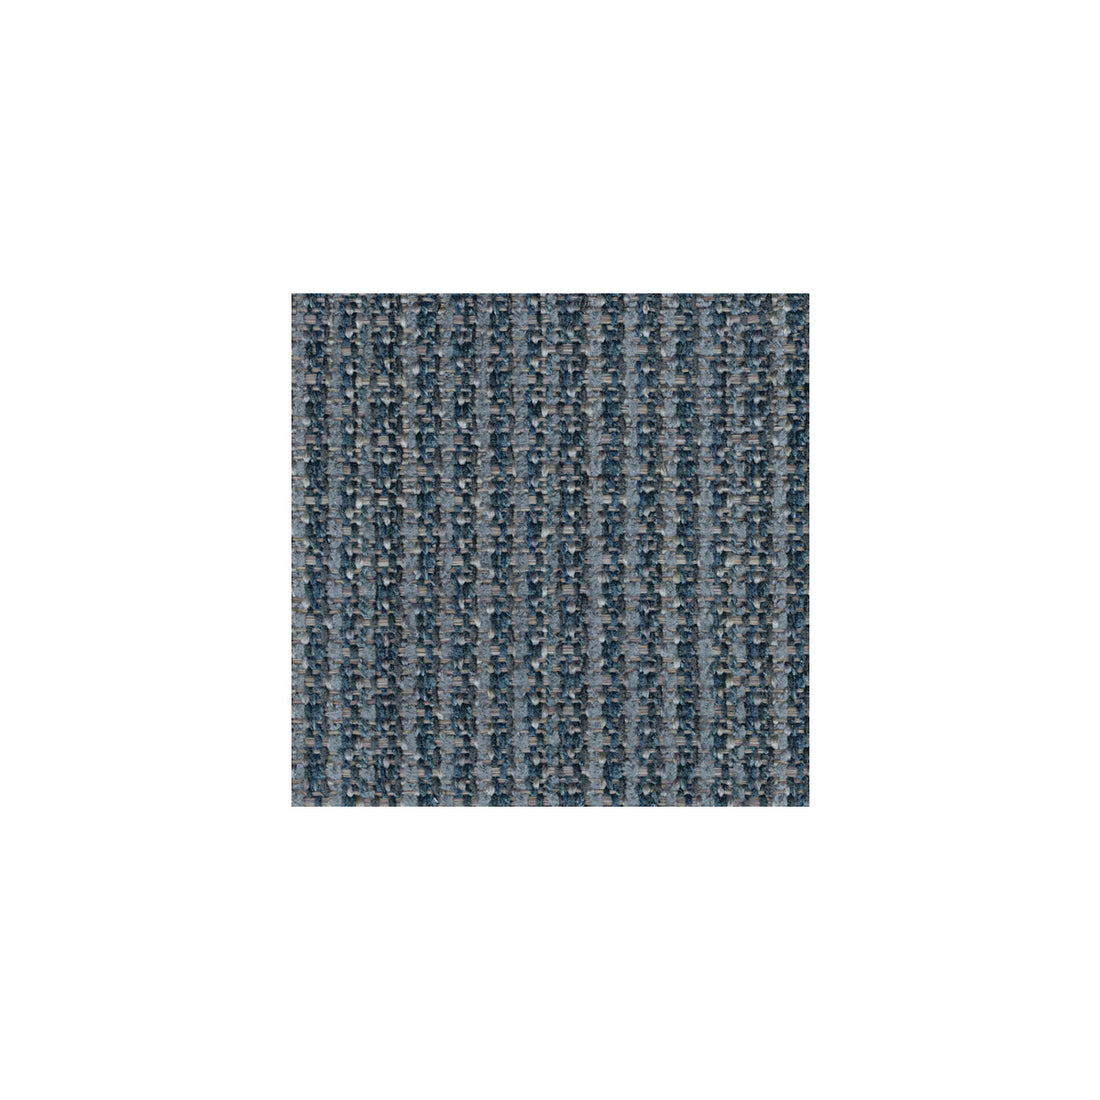 Chenille Tweed fabric in blue smoke color - pattern 30962.5.0 - by Kravet Smart in the Gis collection